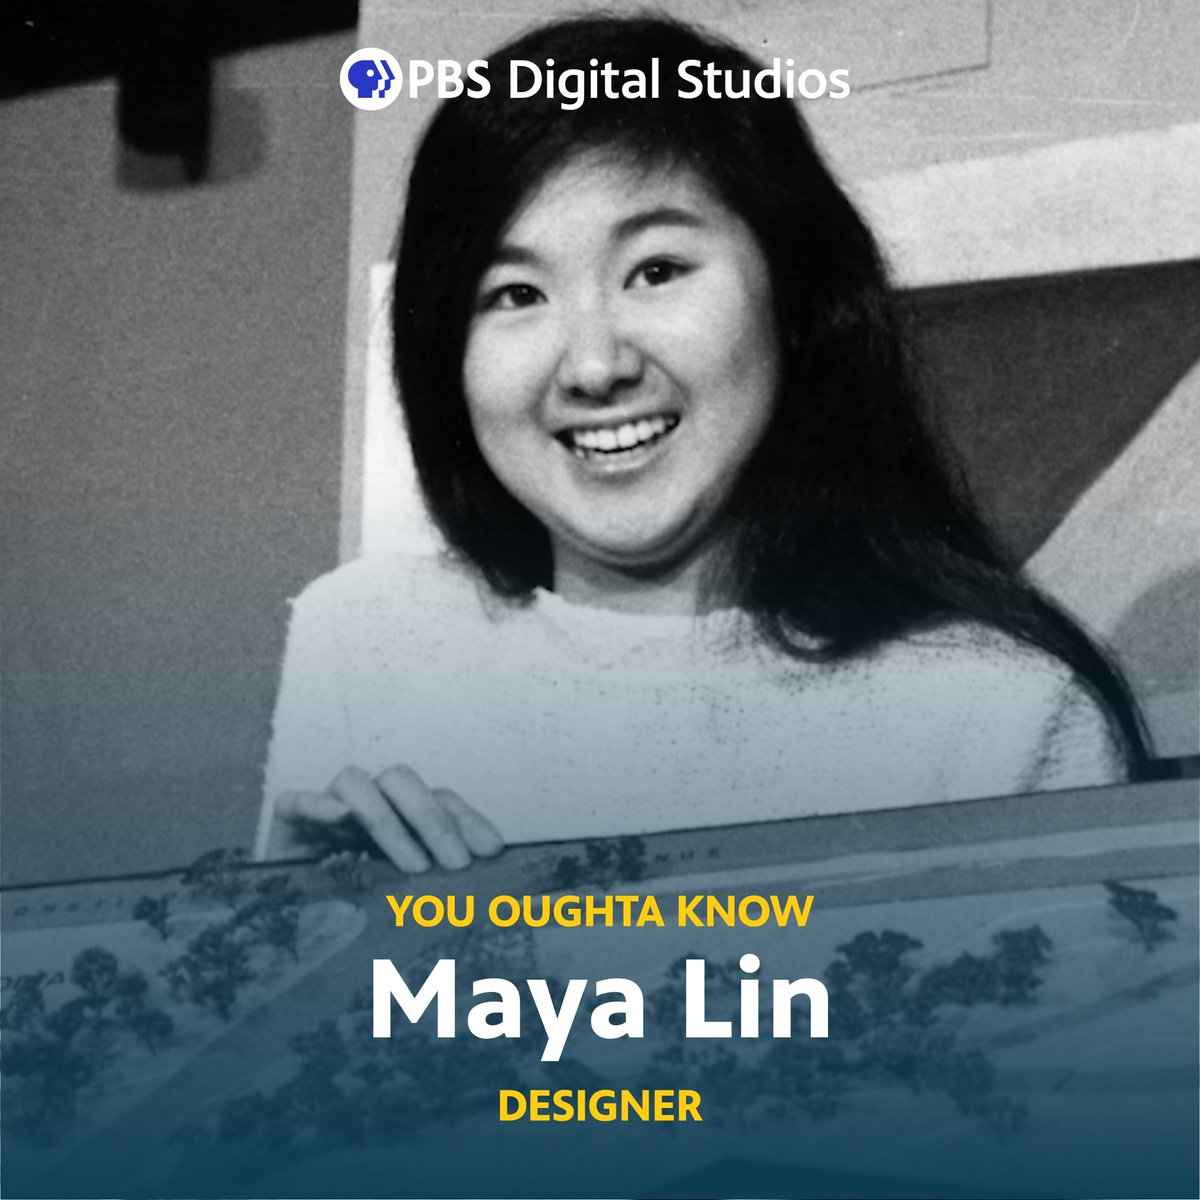 Did you know? Maya Lin’s abstract design for the Vietnam Veterans Memorial was a departure from traditional memorial design. She described the design as “...a rift in the earth, a long, polished, black stone wall, emerging from and receding from the earth.”